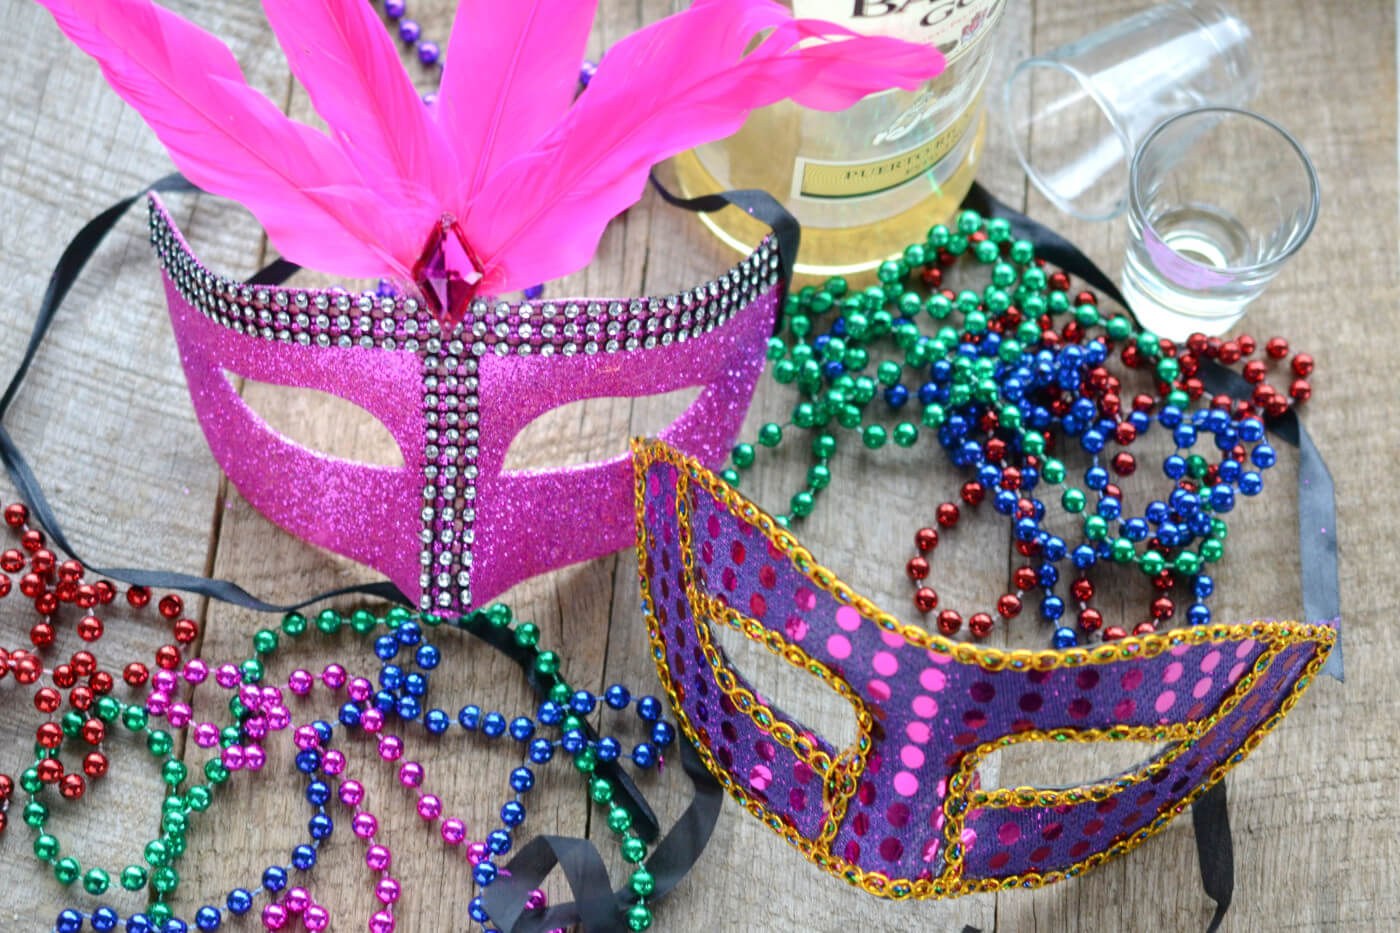 How and Where to Store Your Mardi Gras Throws